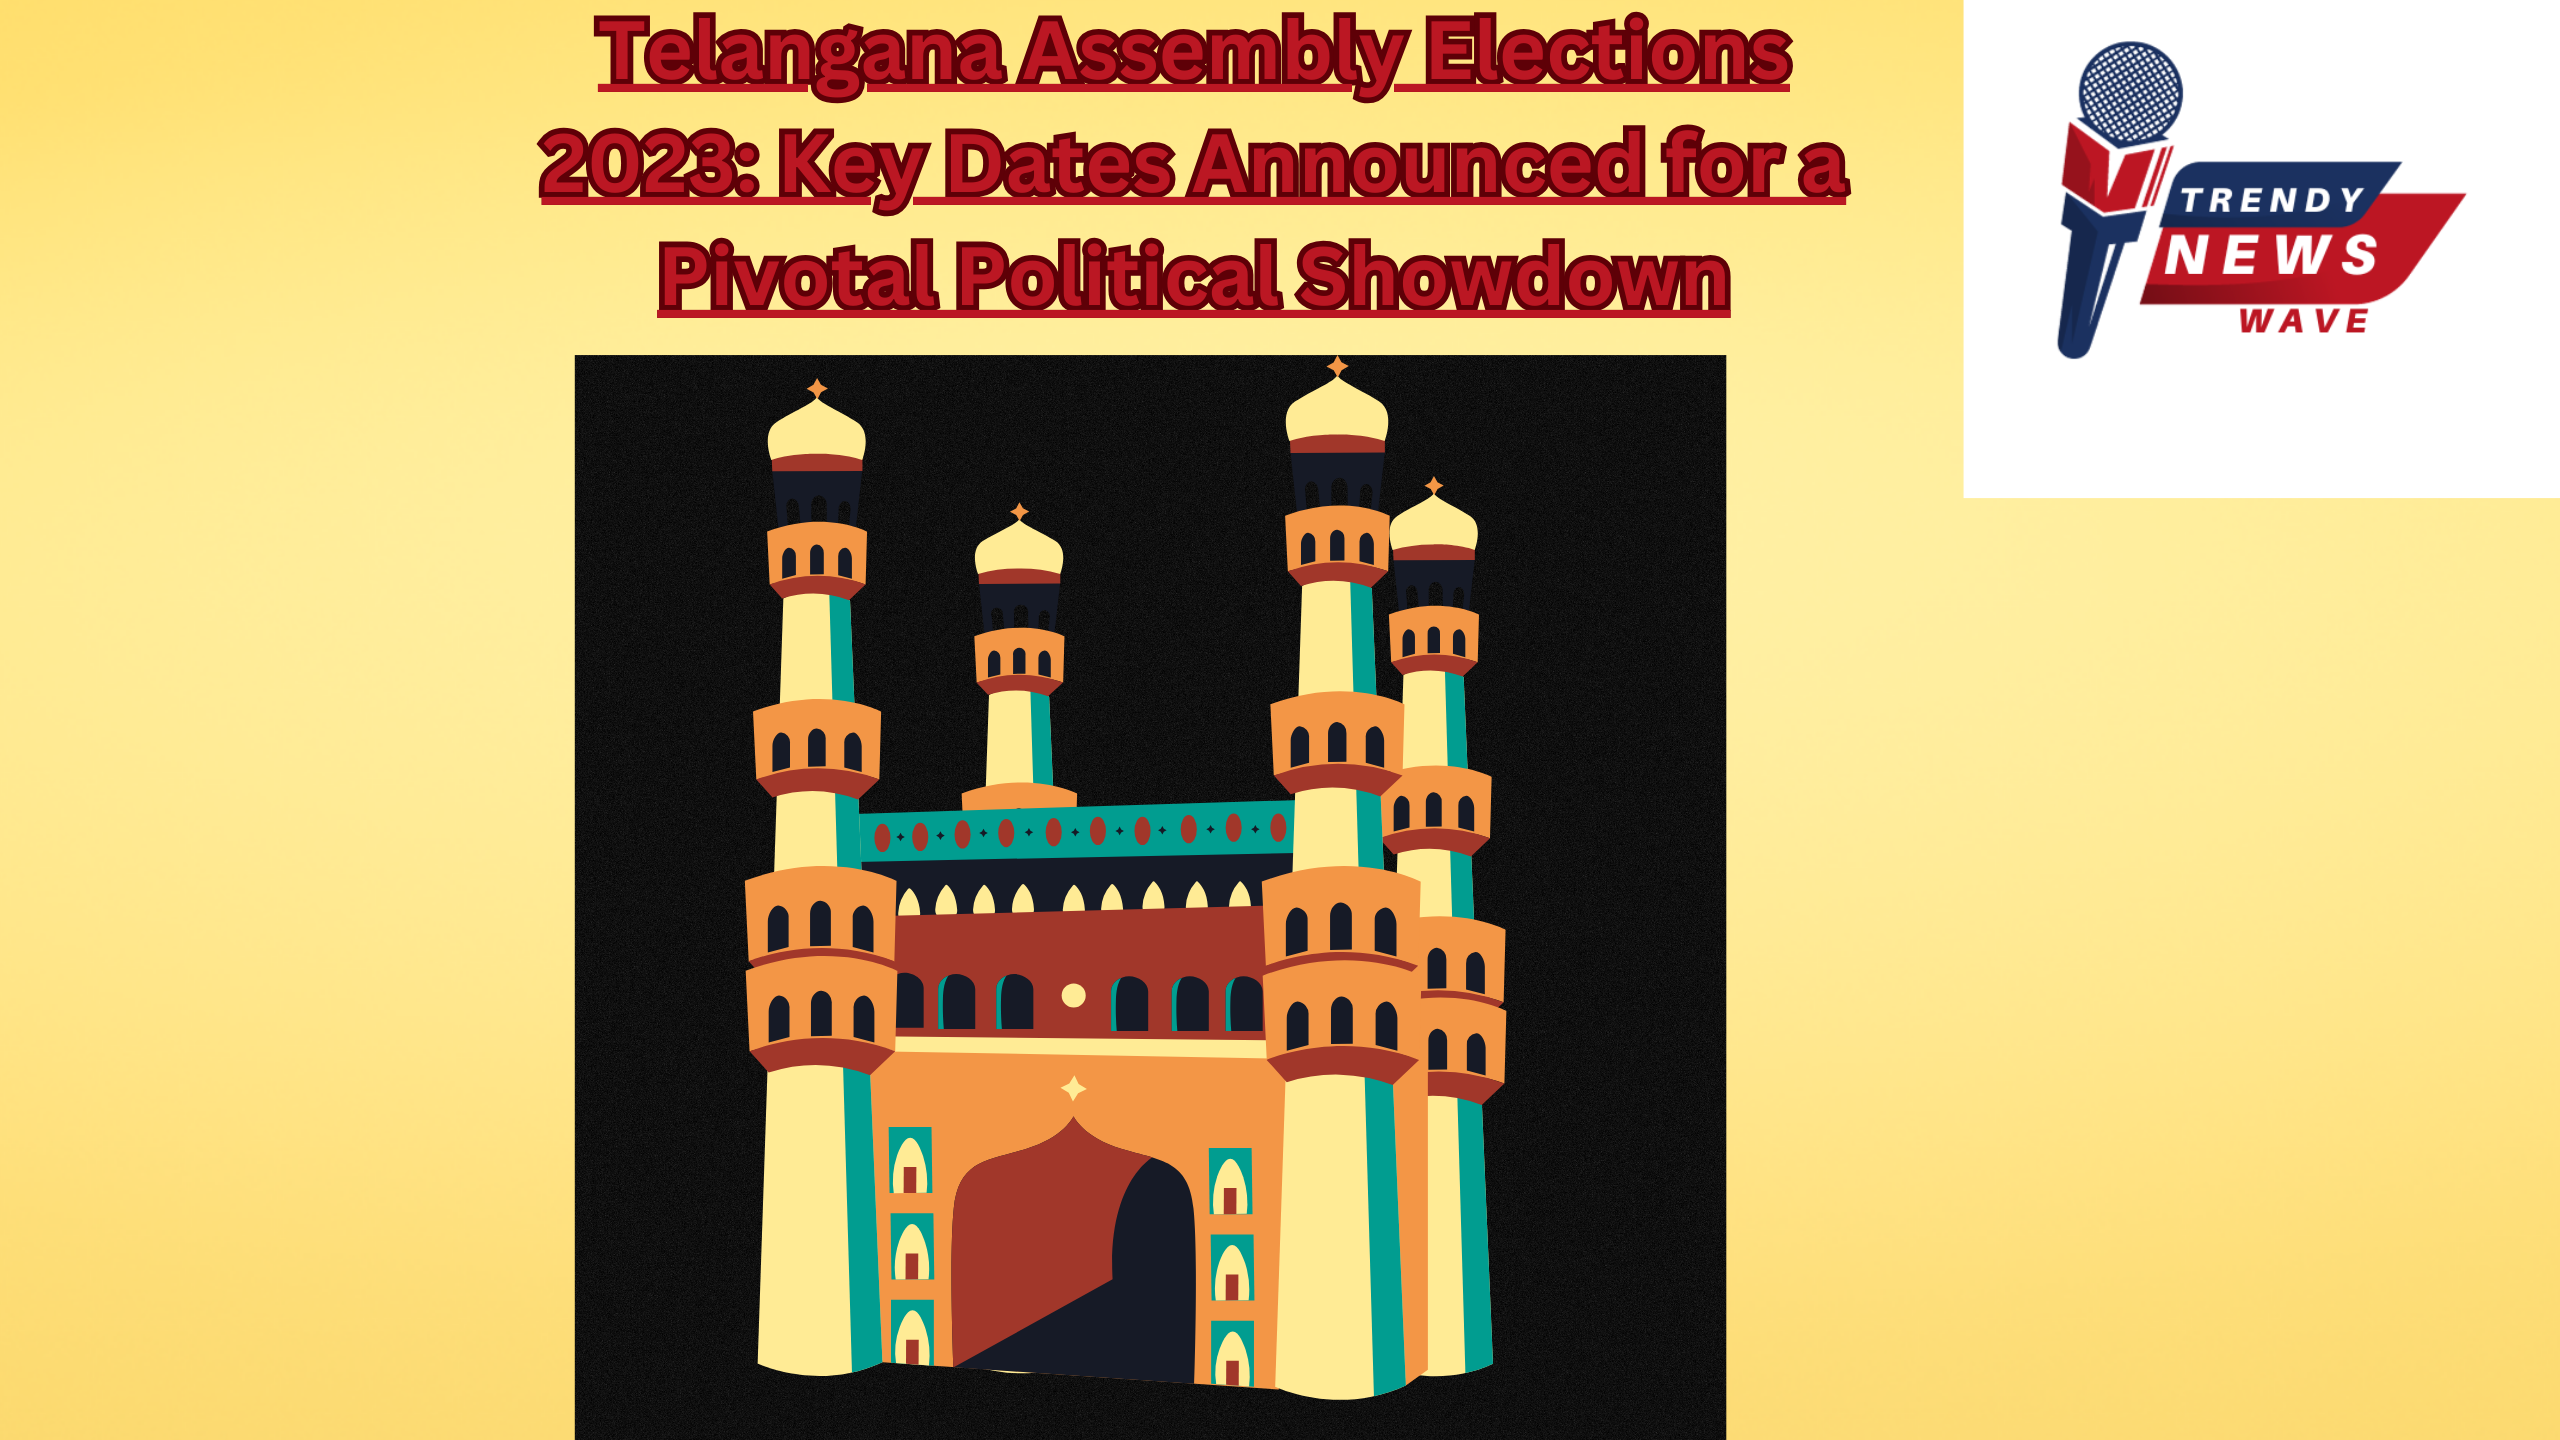 Telangana Assembly Elections 2023: Key Dates Announced for a Pivotal Political Showdown